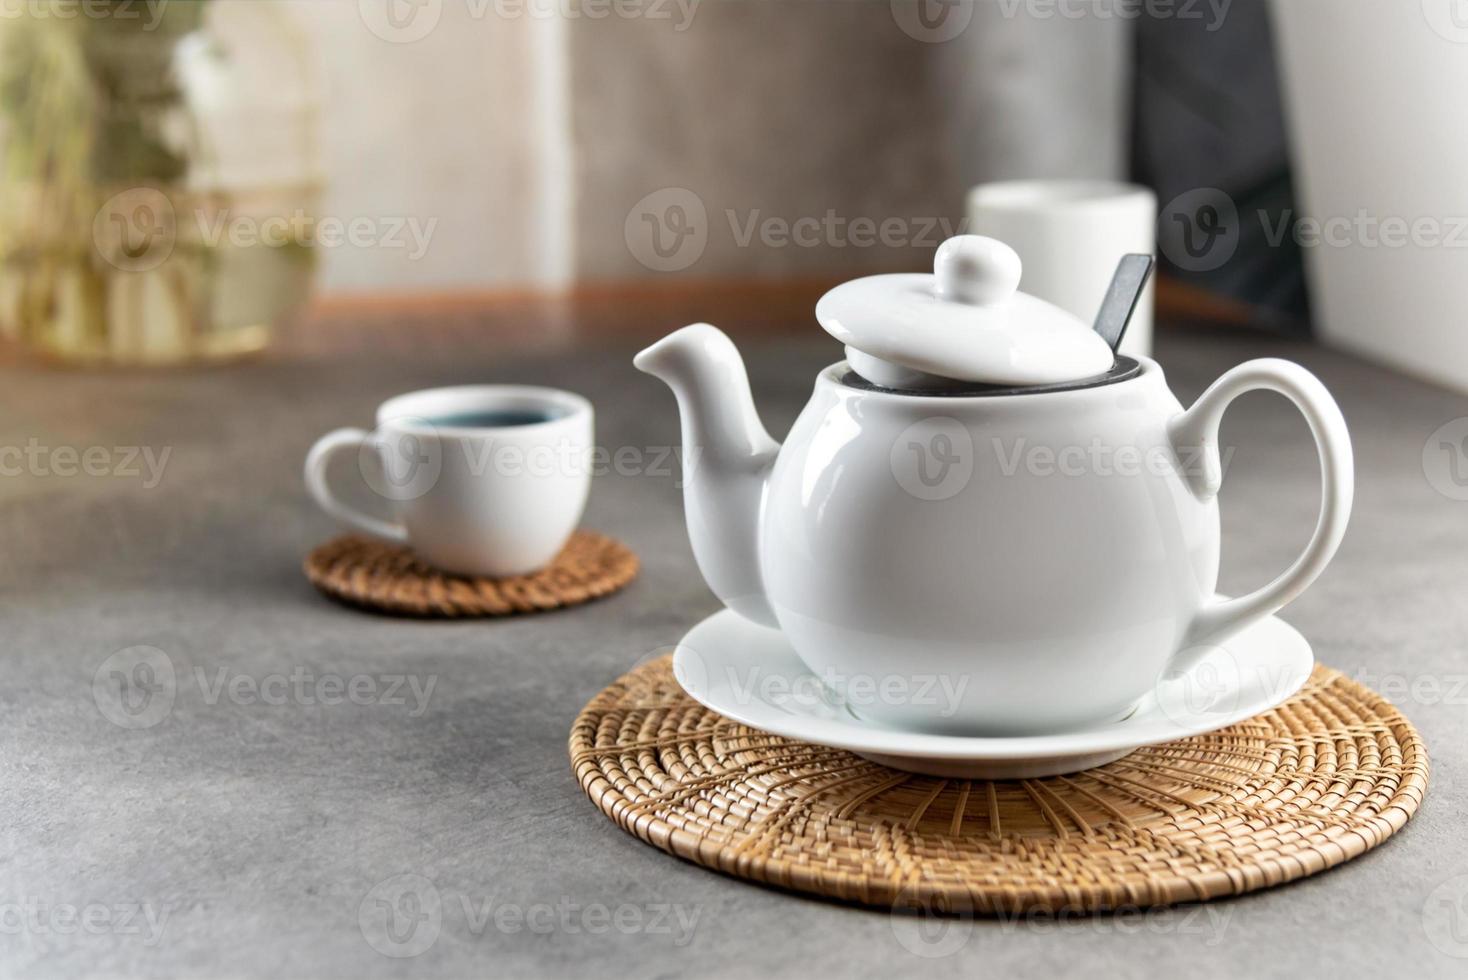 White porcelain tea cup and teapot, Afternoon tea table setting photo